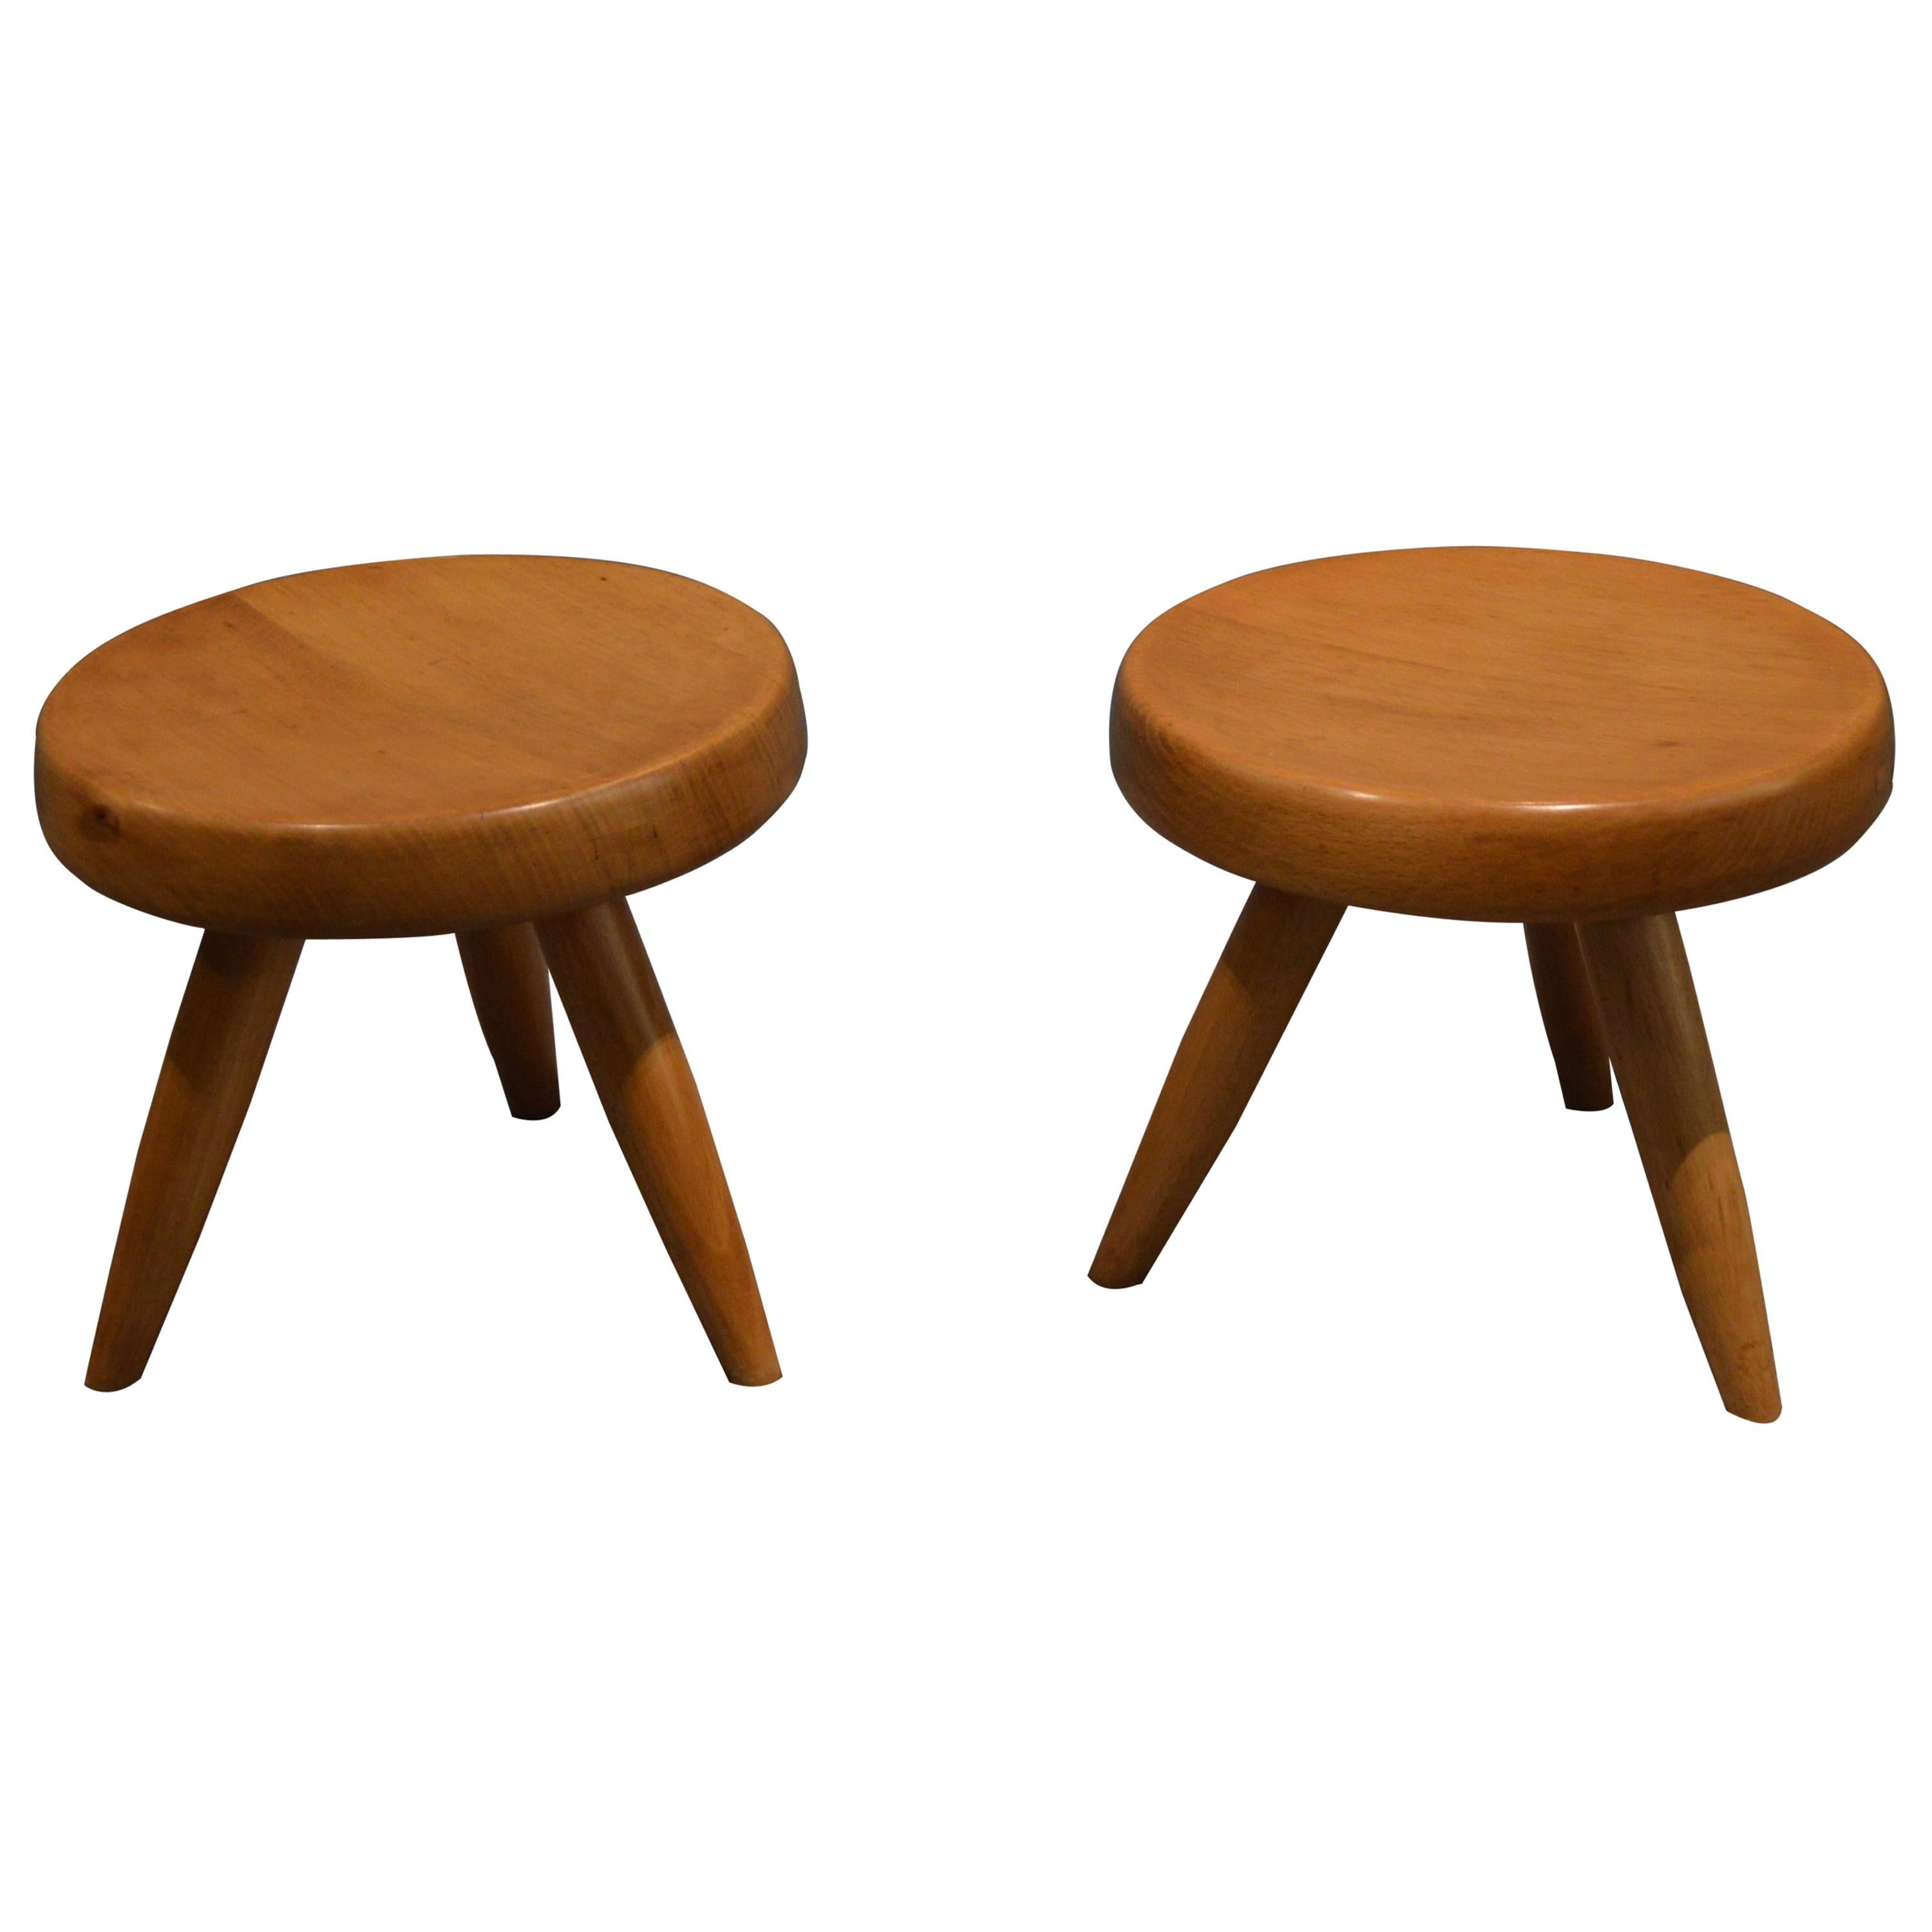 Pair of Stools by Charlotte Perriand